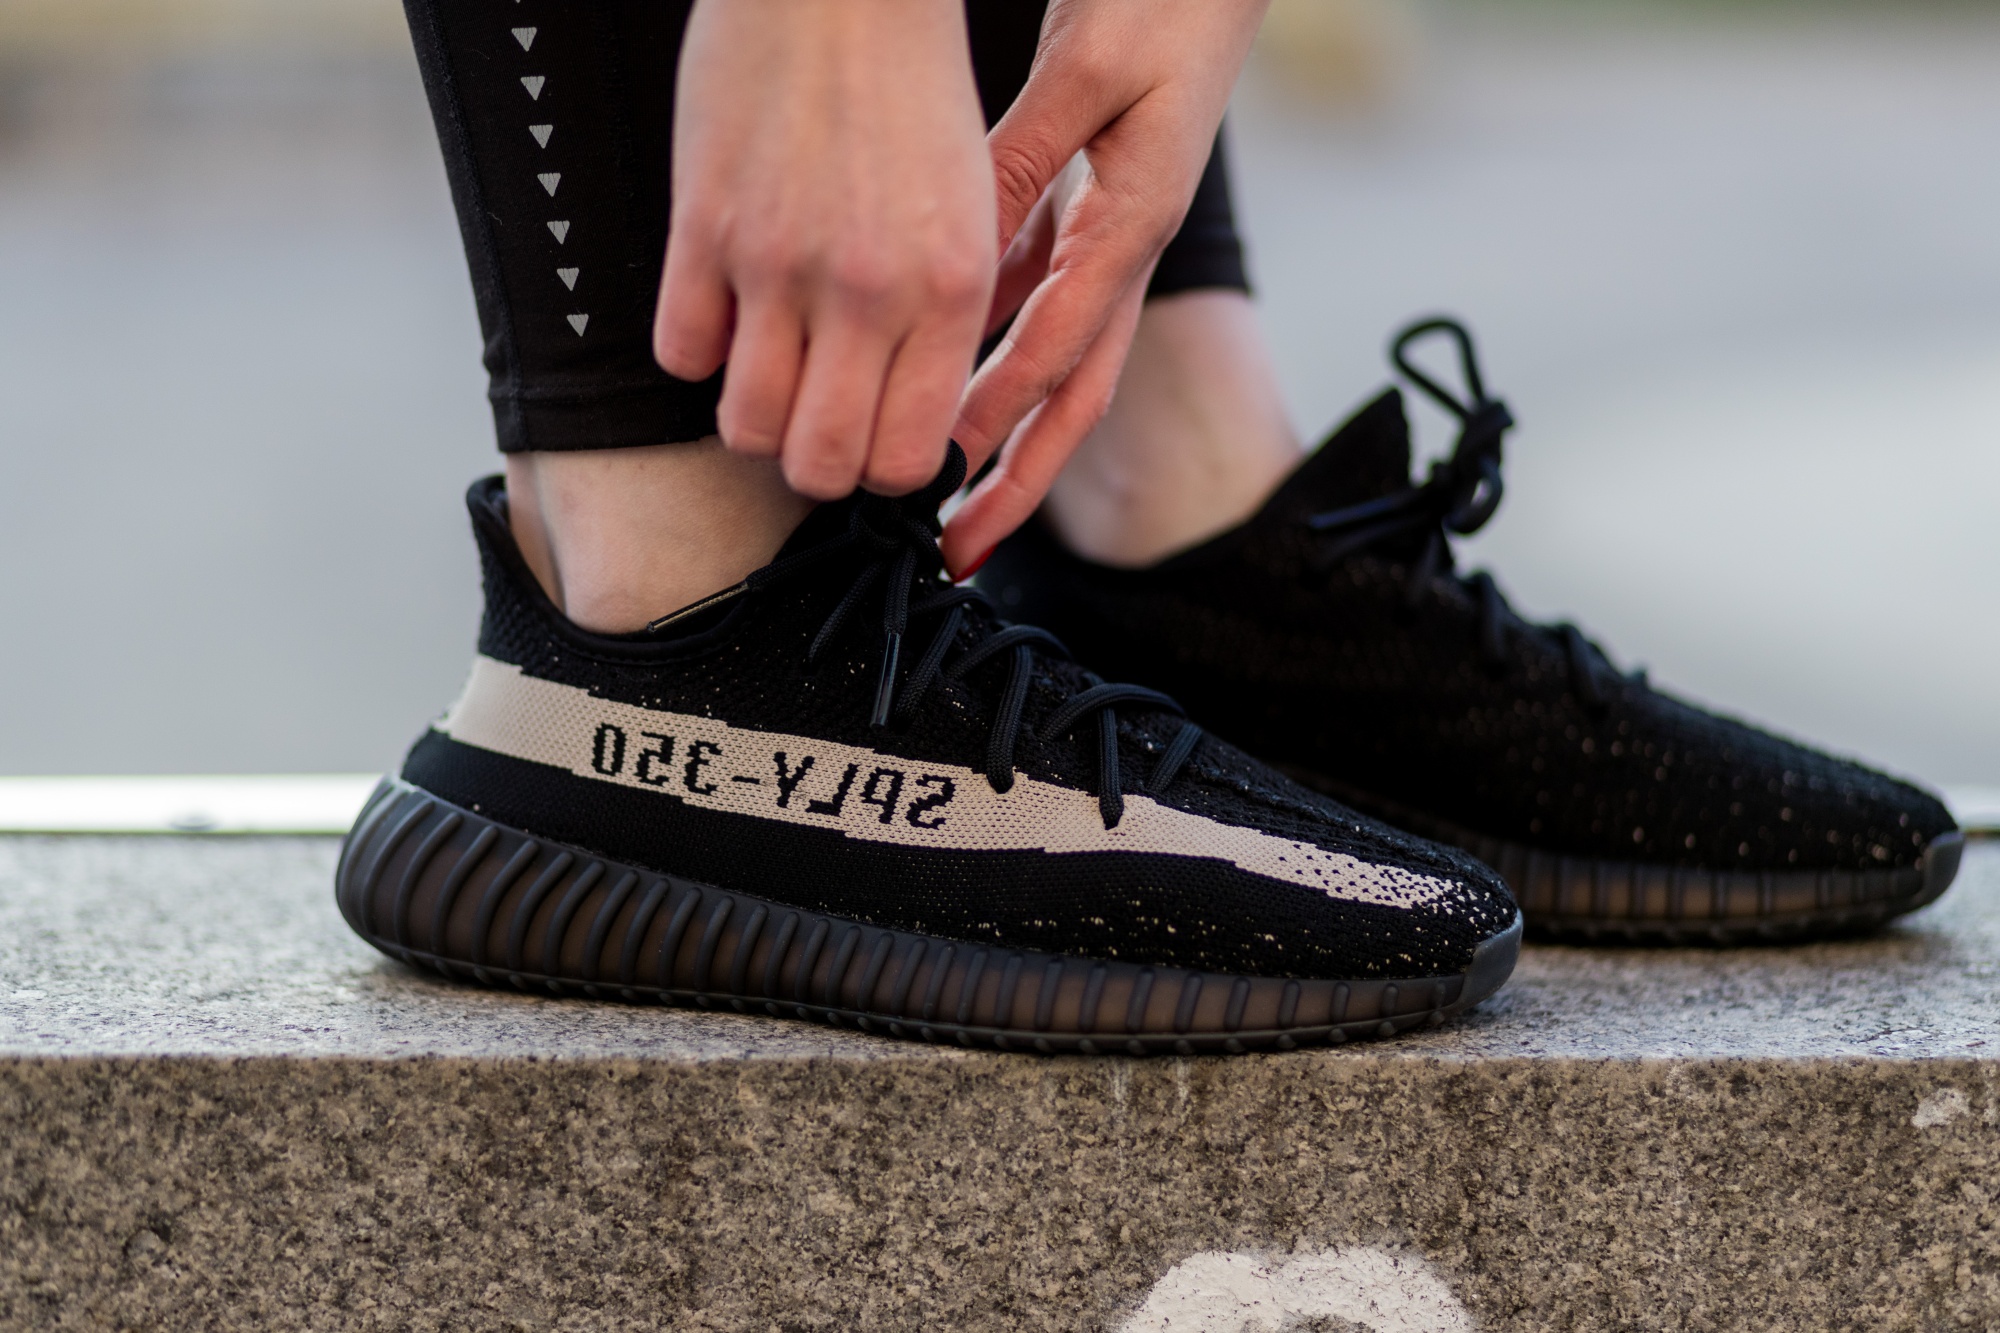 Adidas Small Step While Mulling Yeezy - Bloomberg